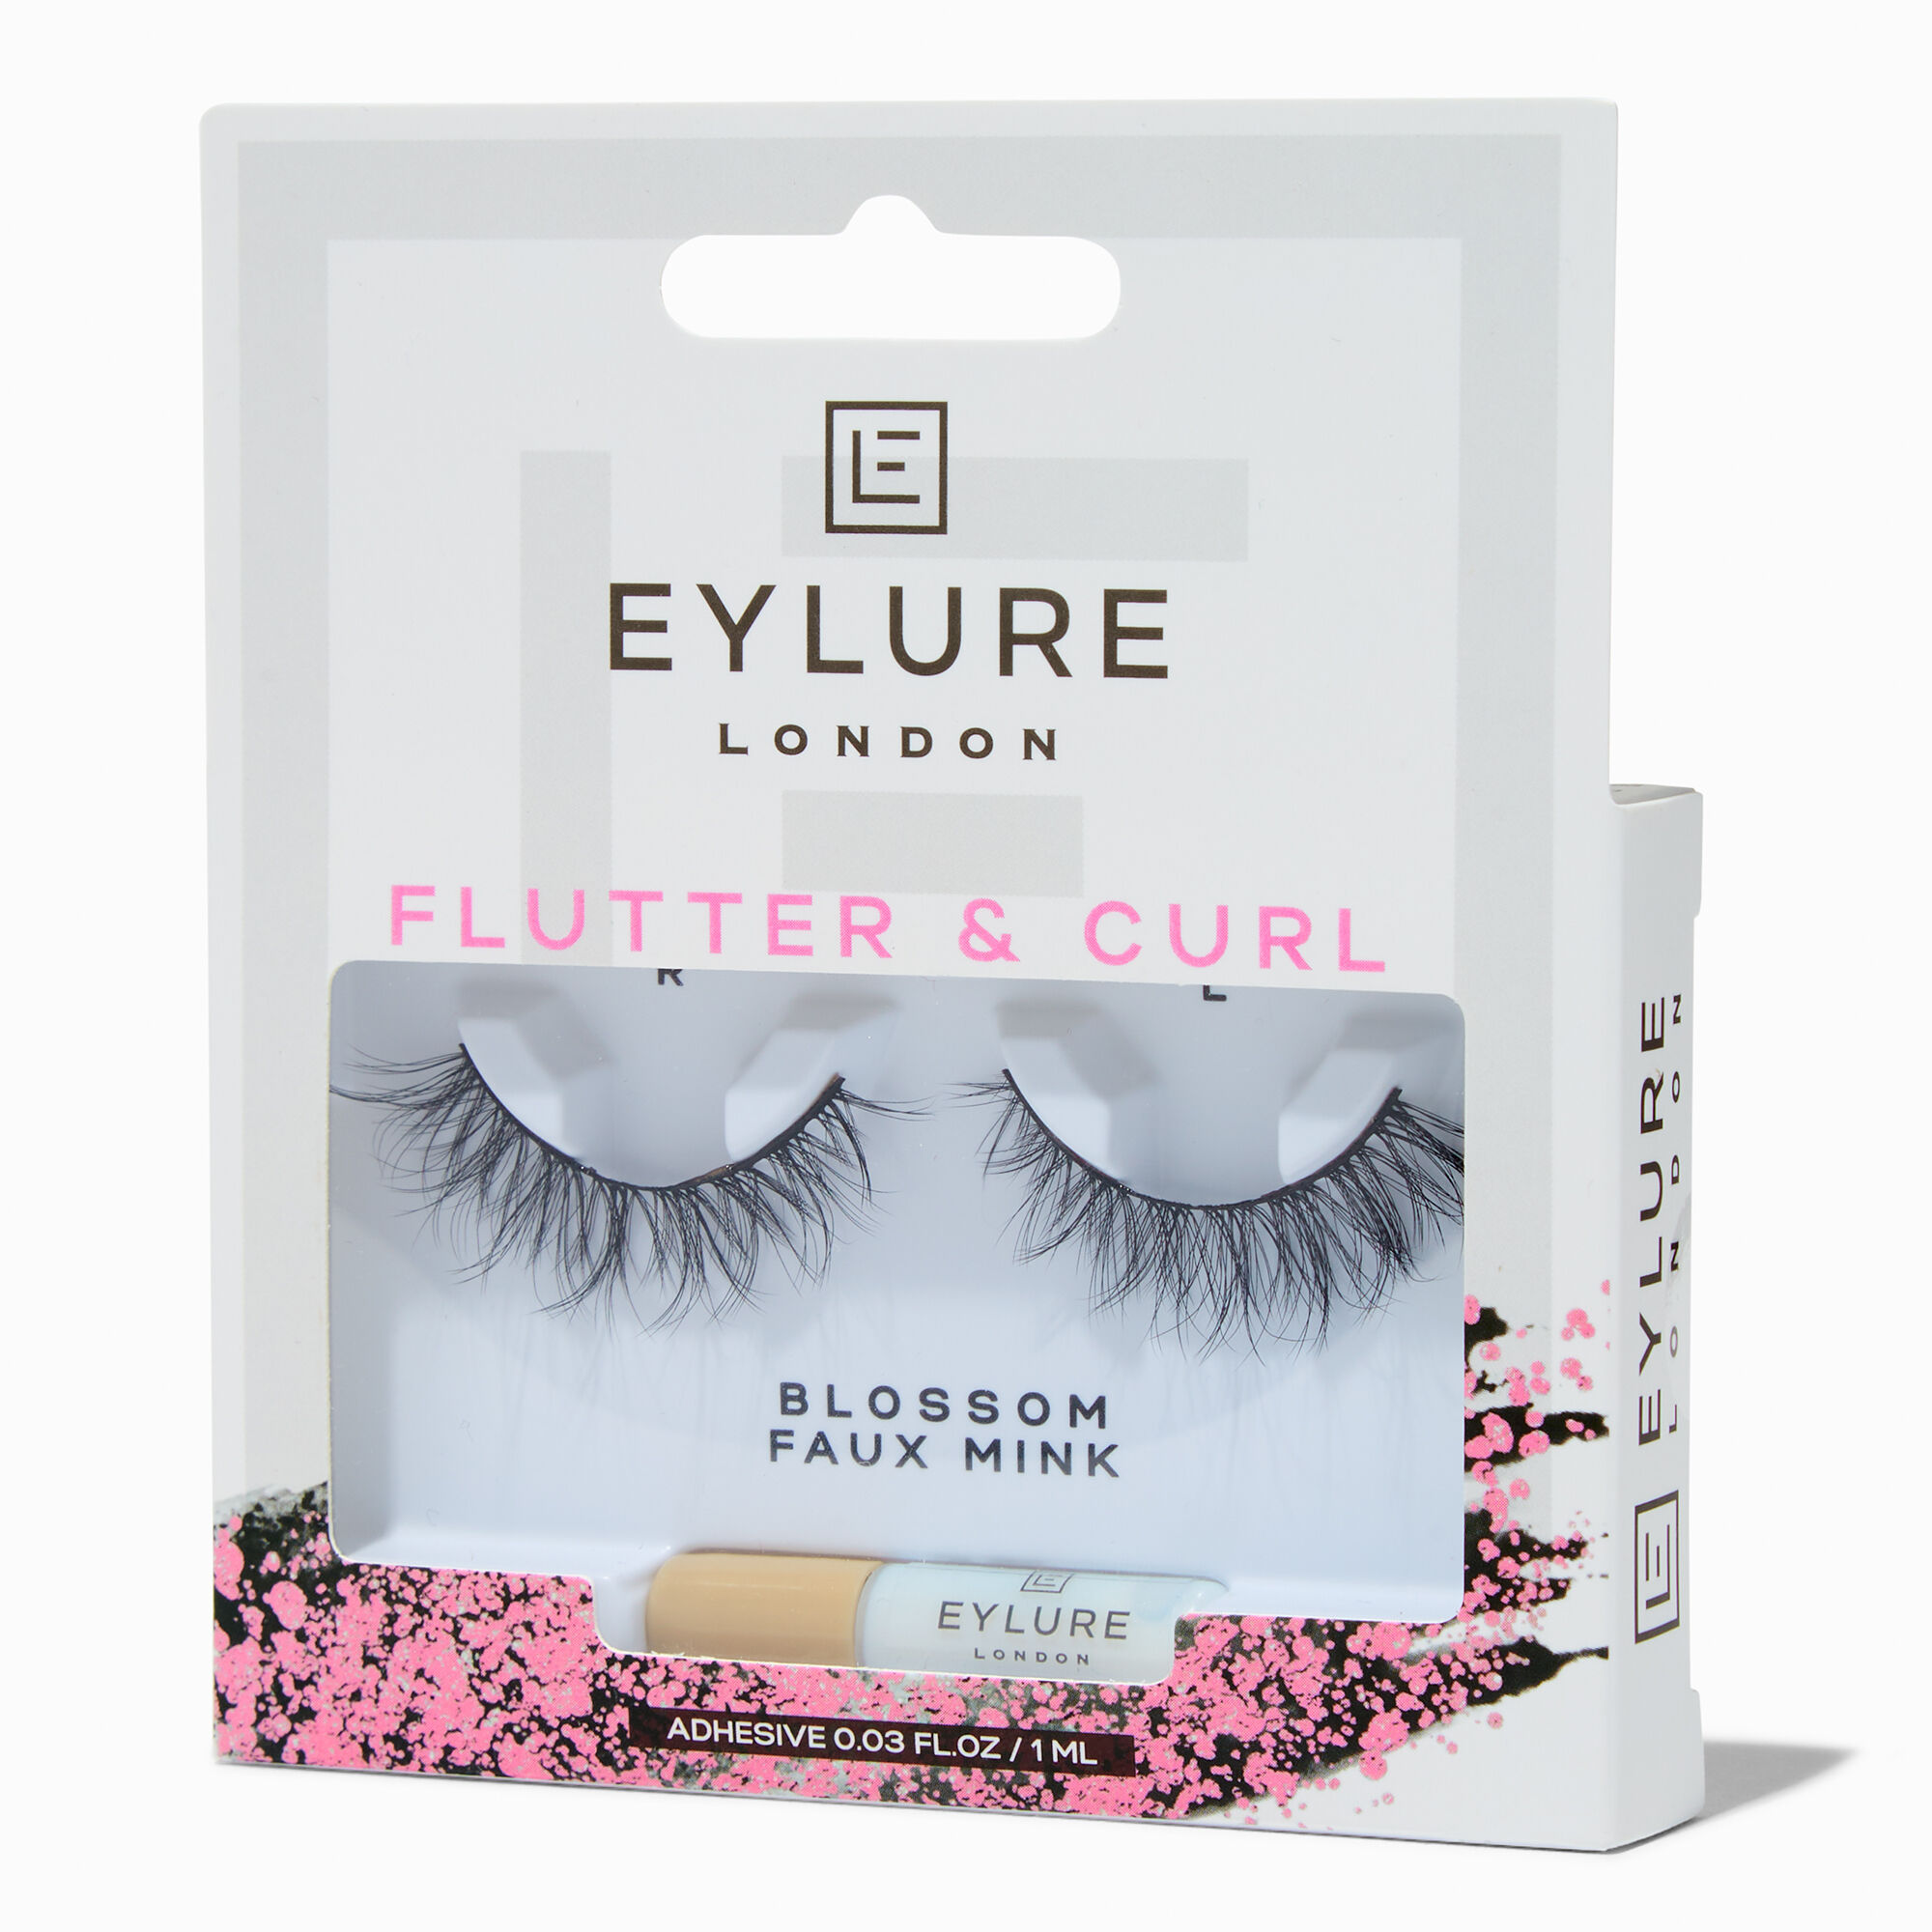 View Claires Eylure Flutter Curl Faux Mink Eyelashes Blossom information